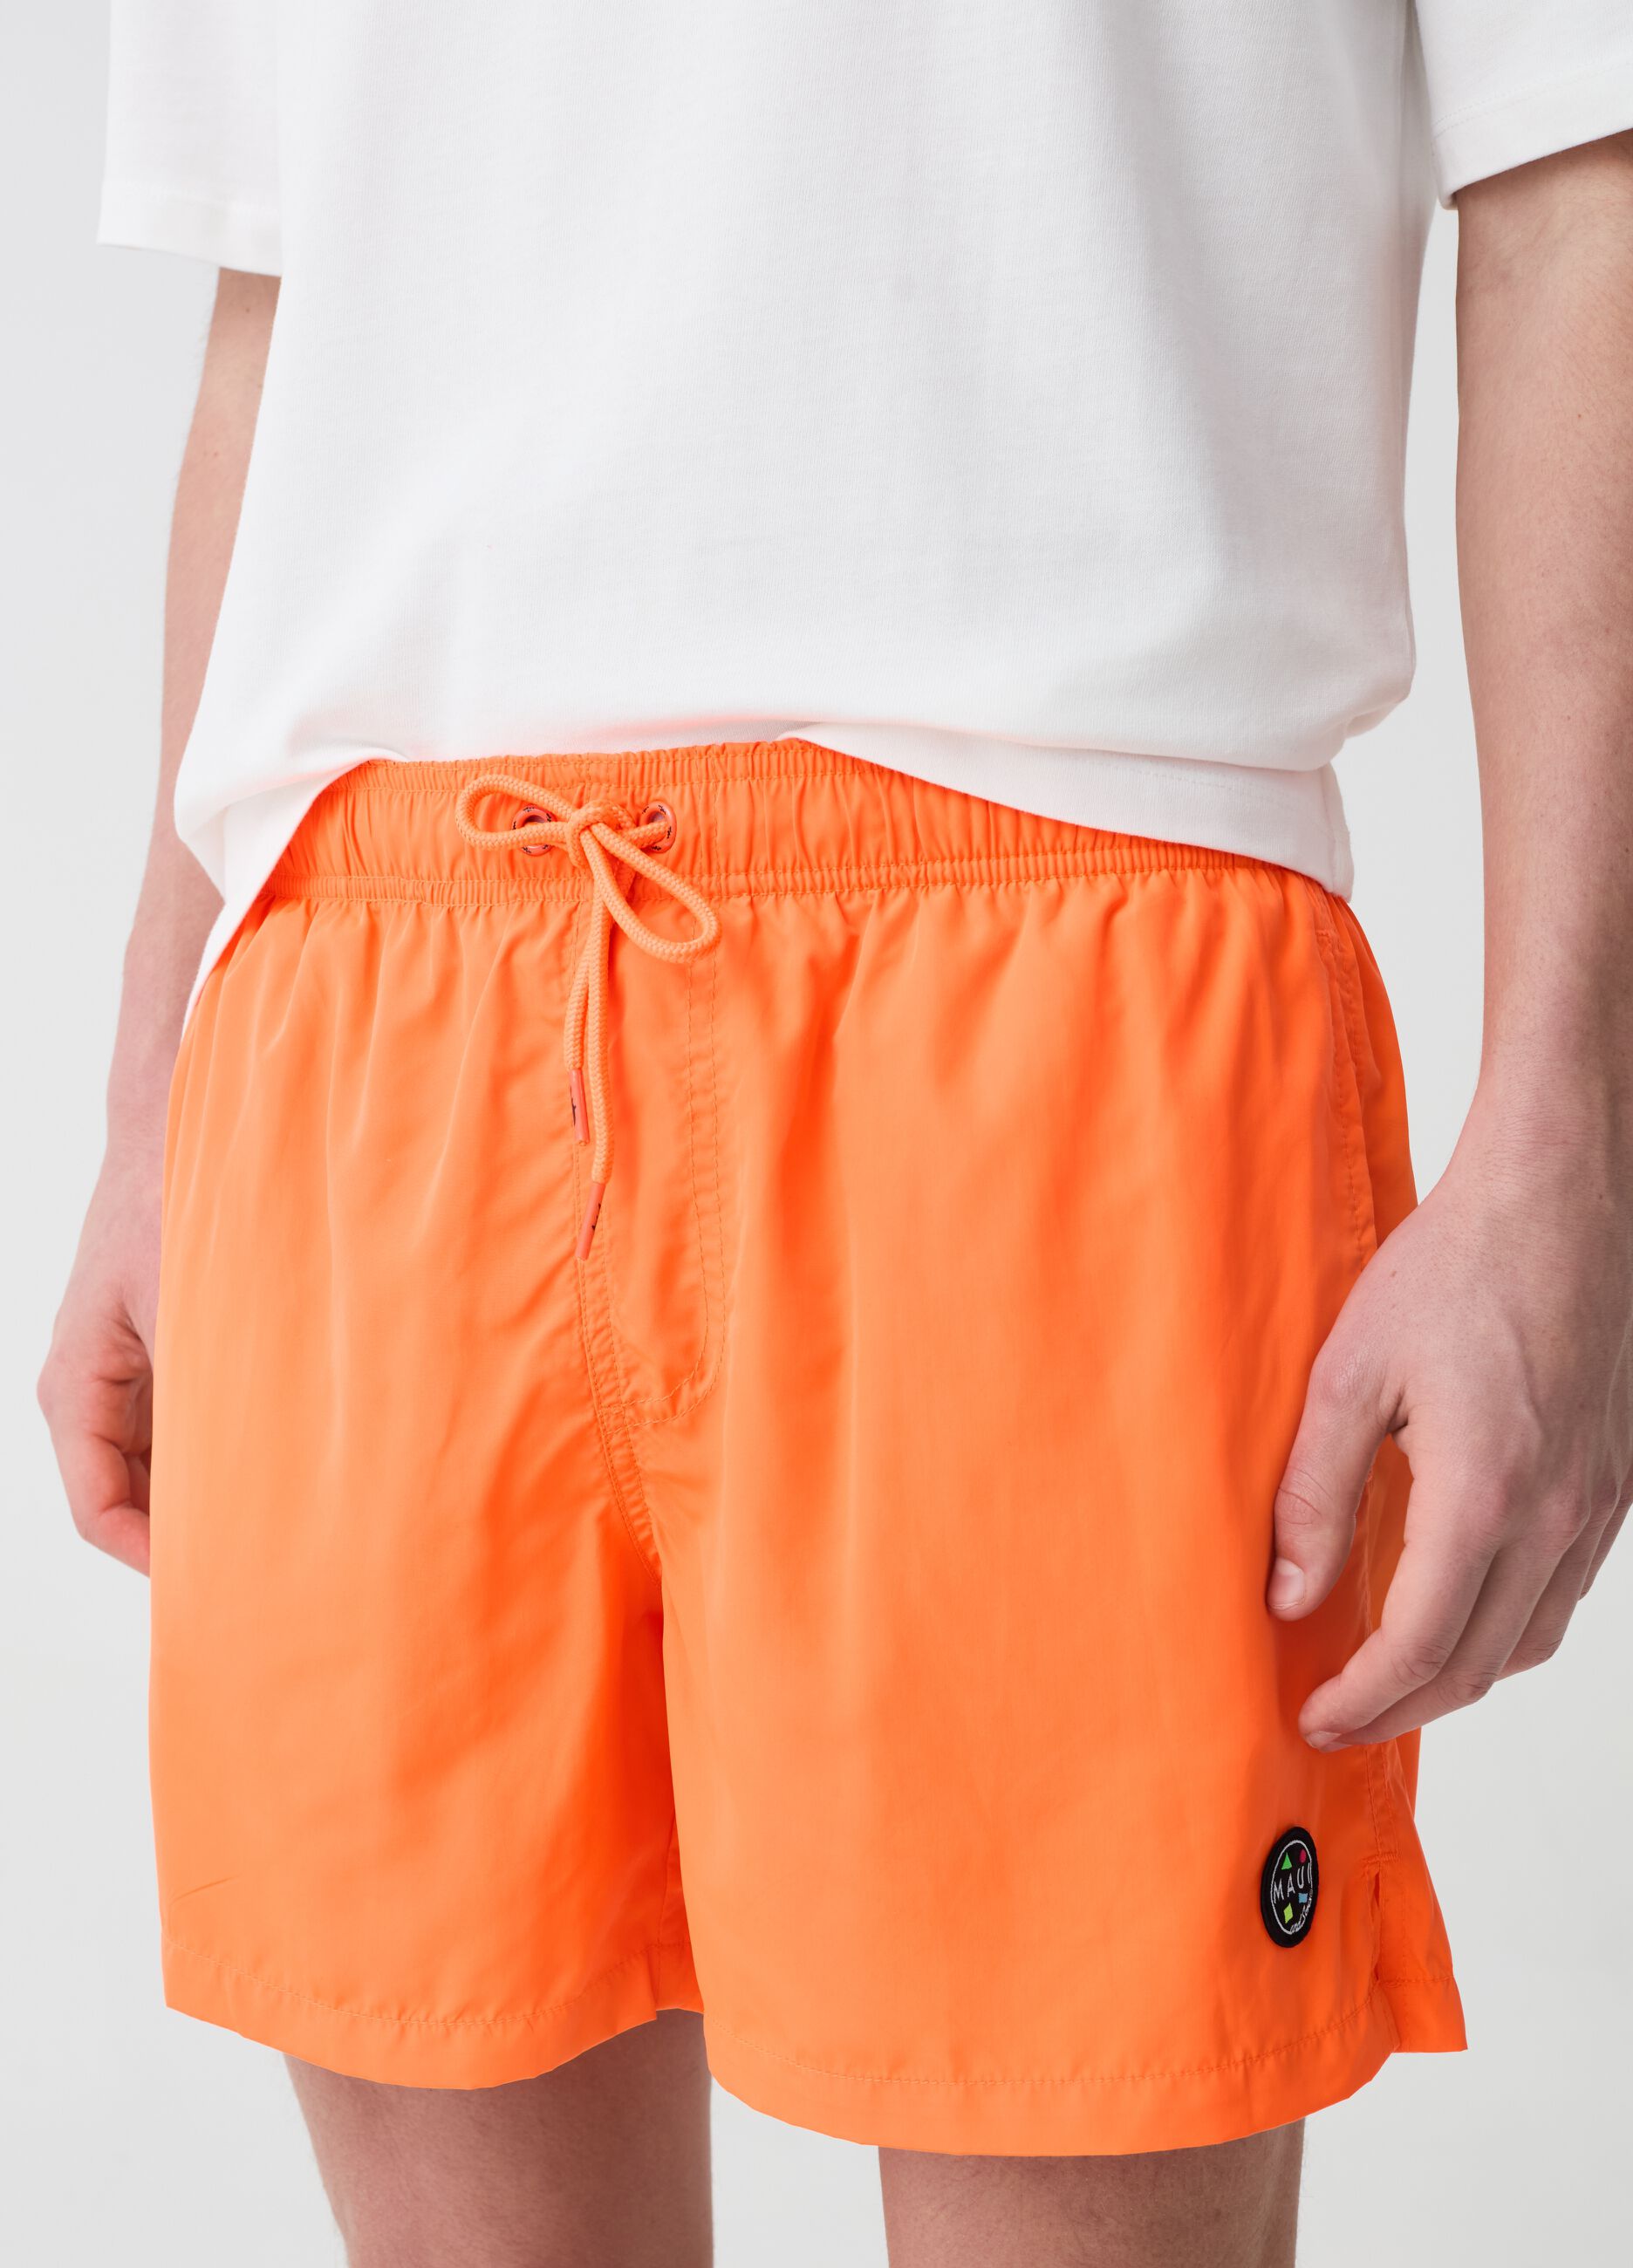 Fluorescent swimming trunks with logo patch